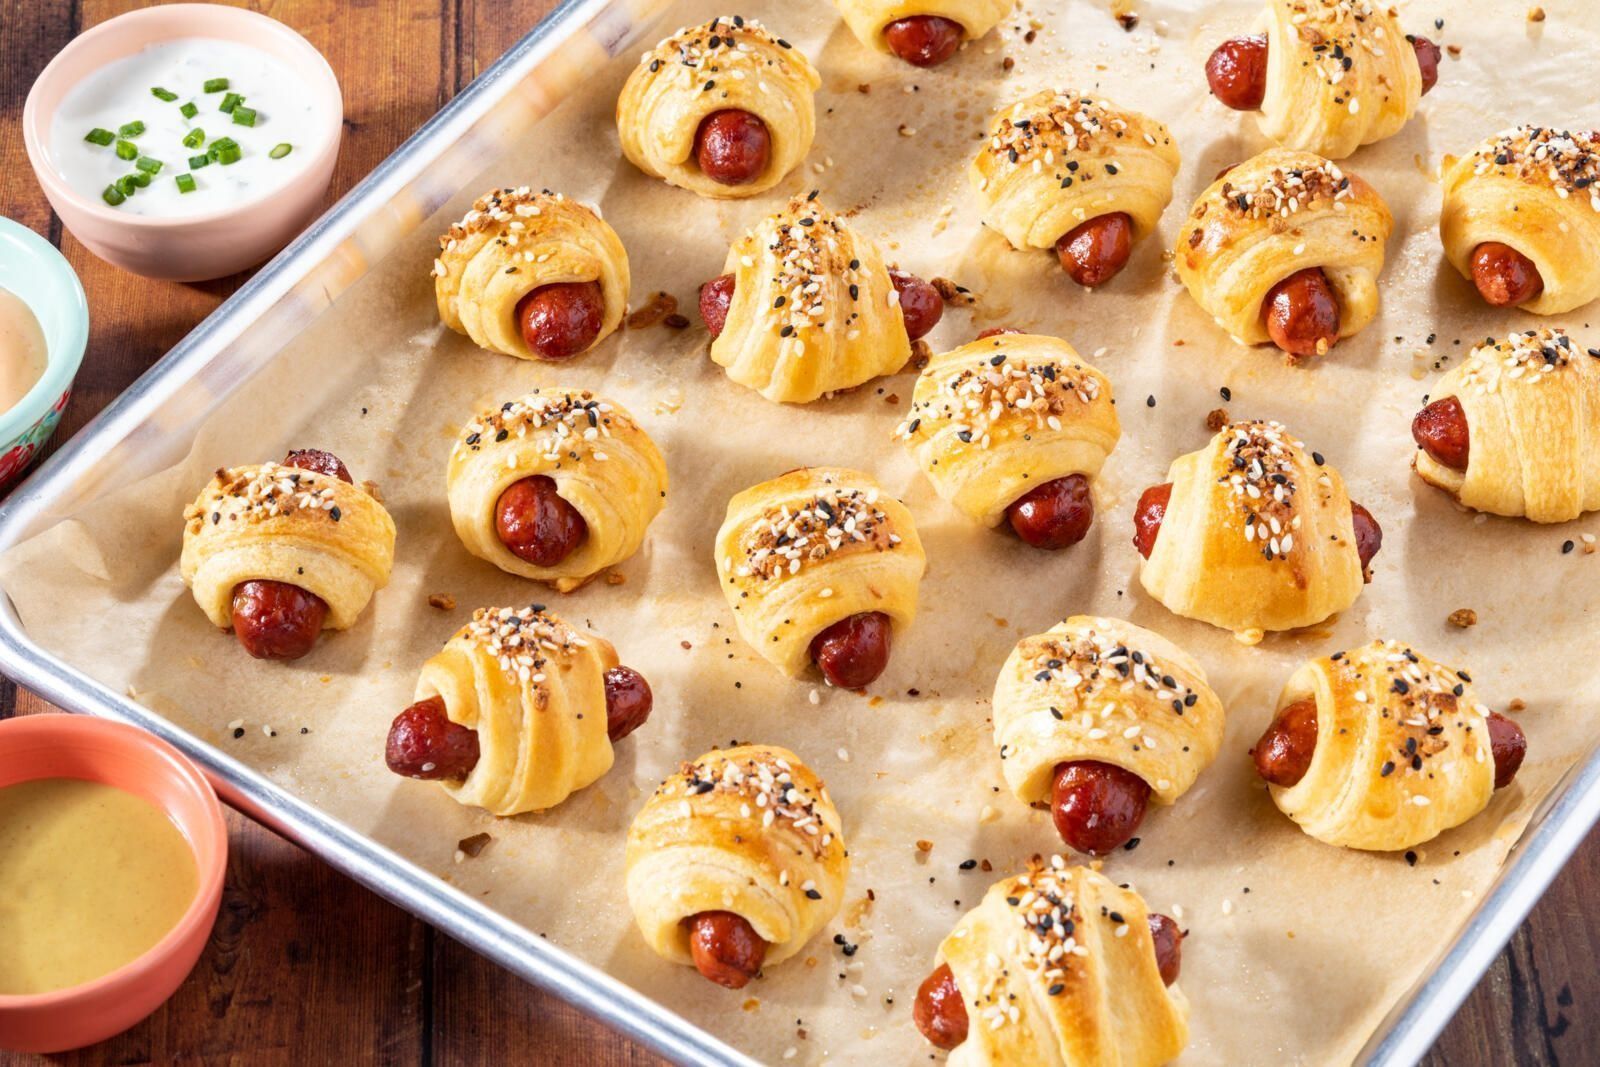 Best Ever Crescent Roll Recipes! From Appetizers to Dessert!